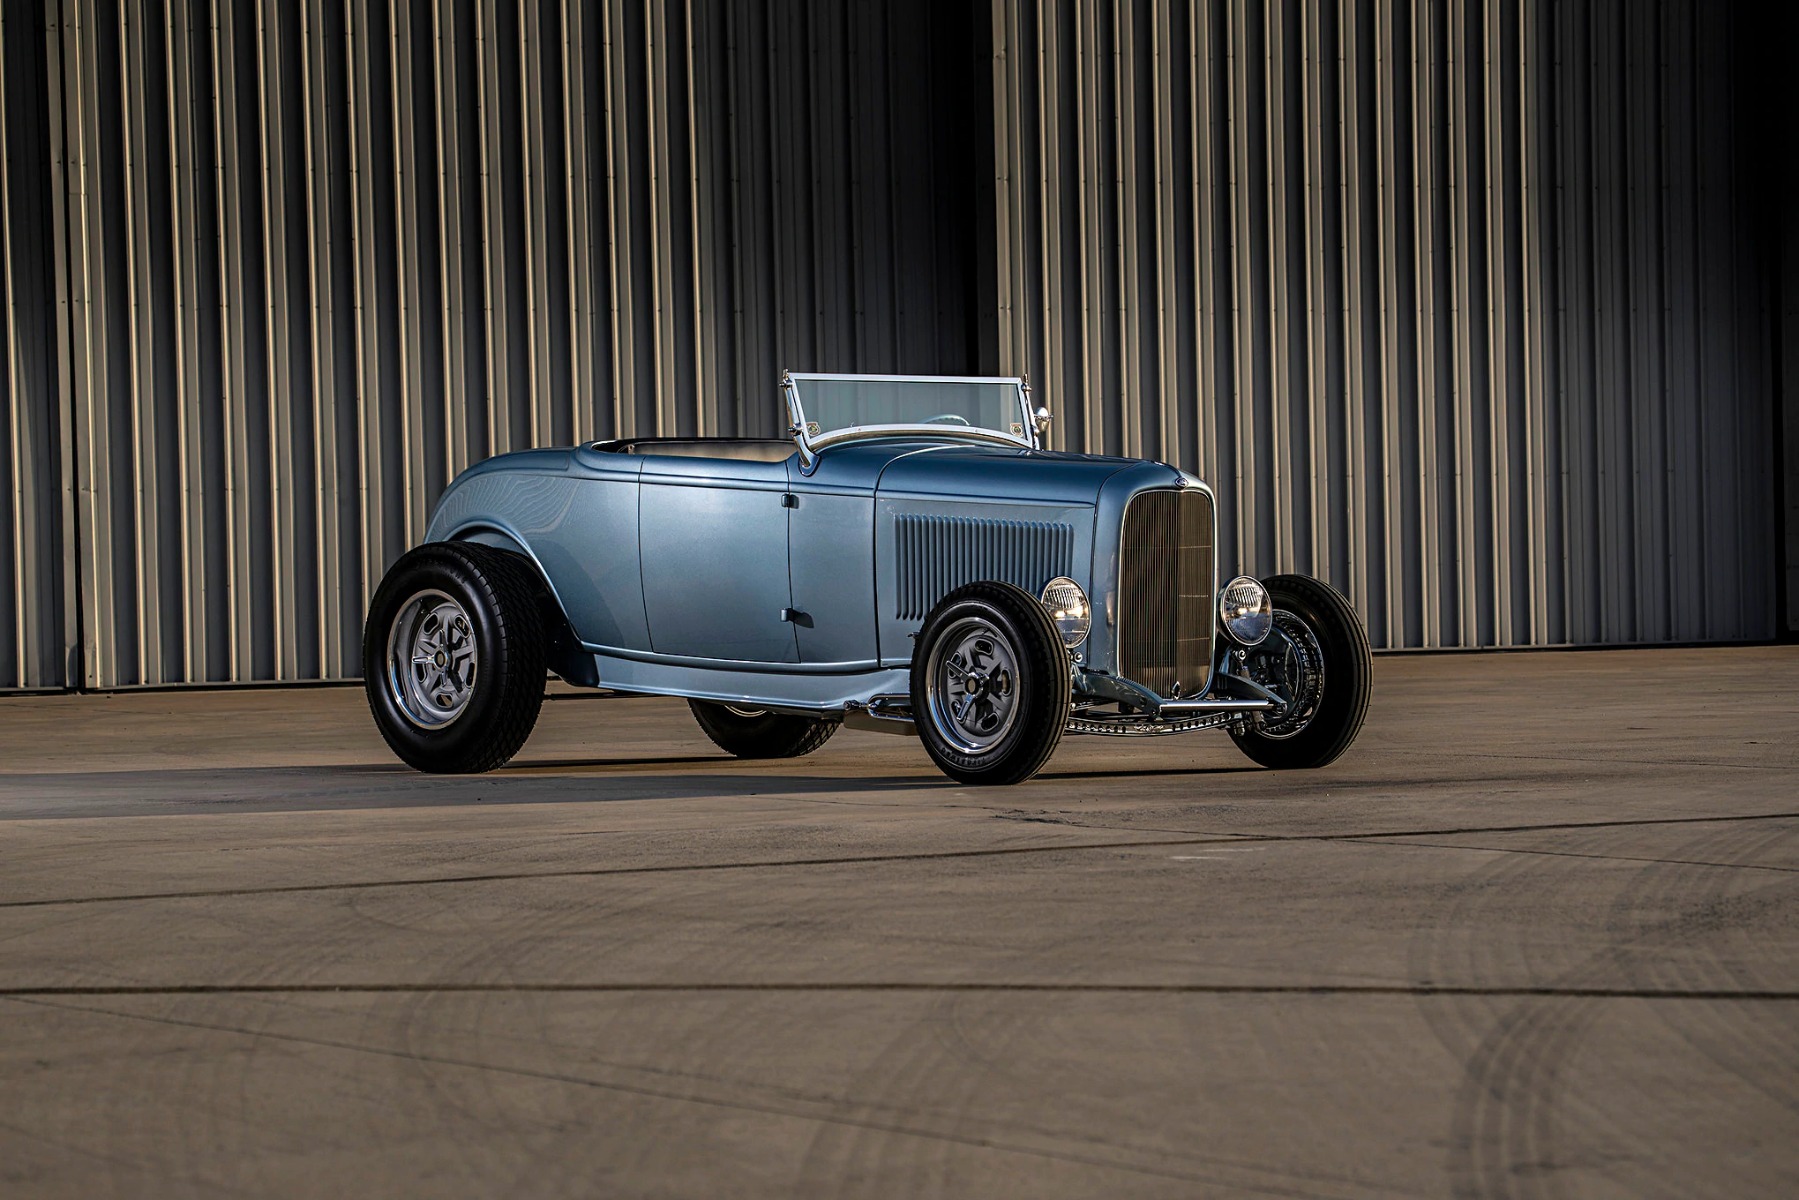 Featured image for “Gordon Leland’s ’60s-style 1932 Highboy Roadster”